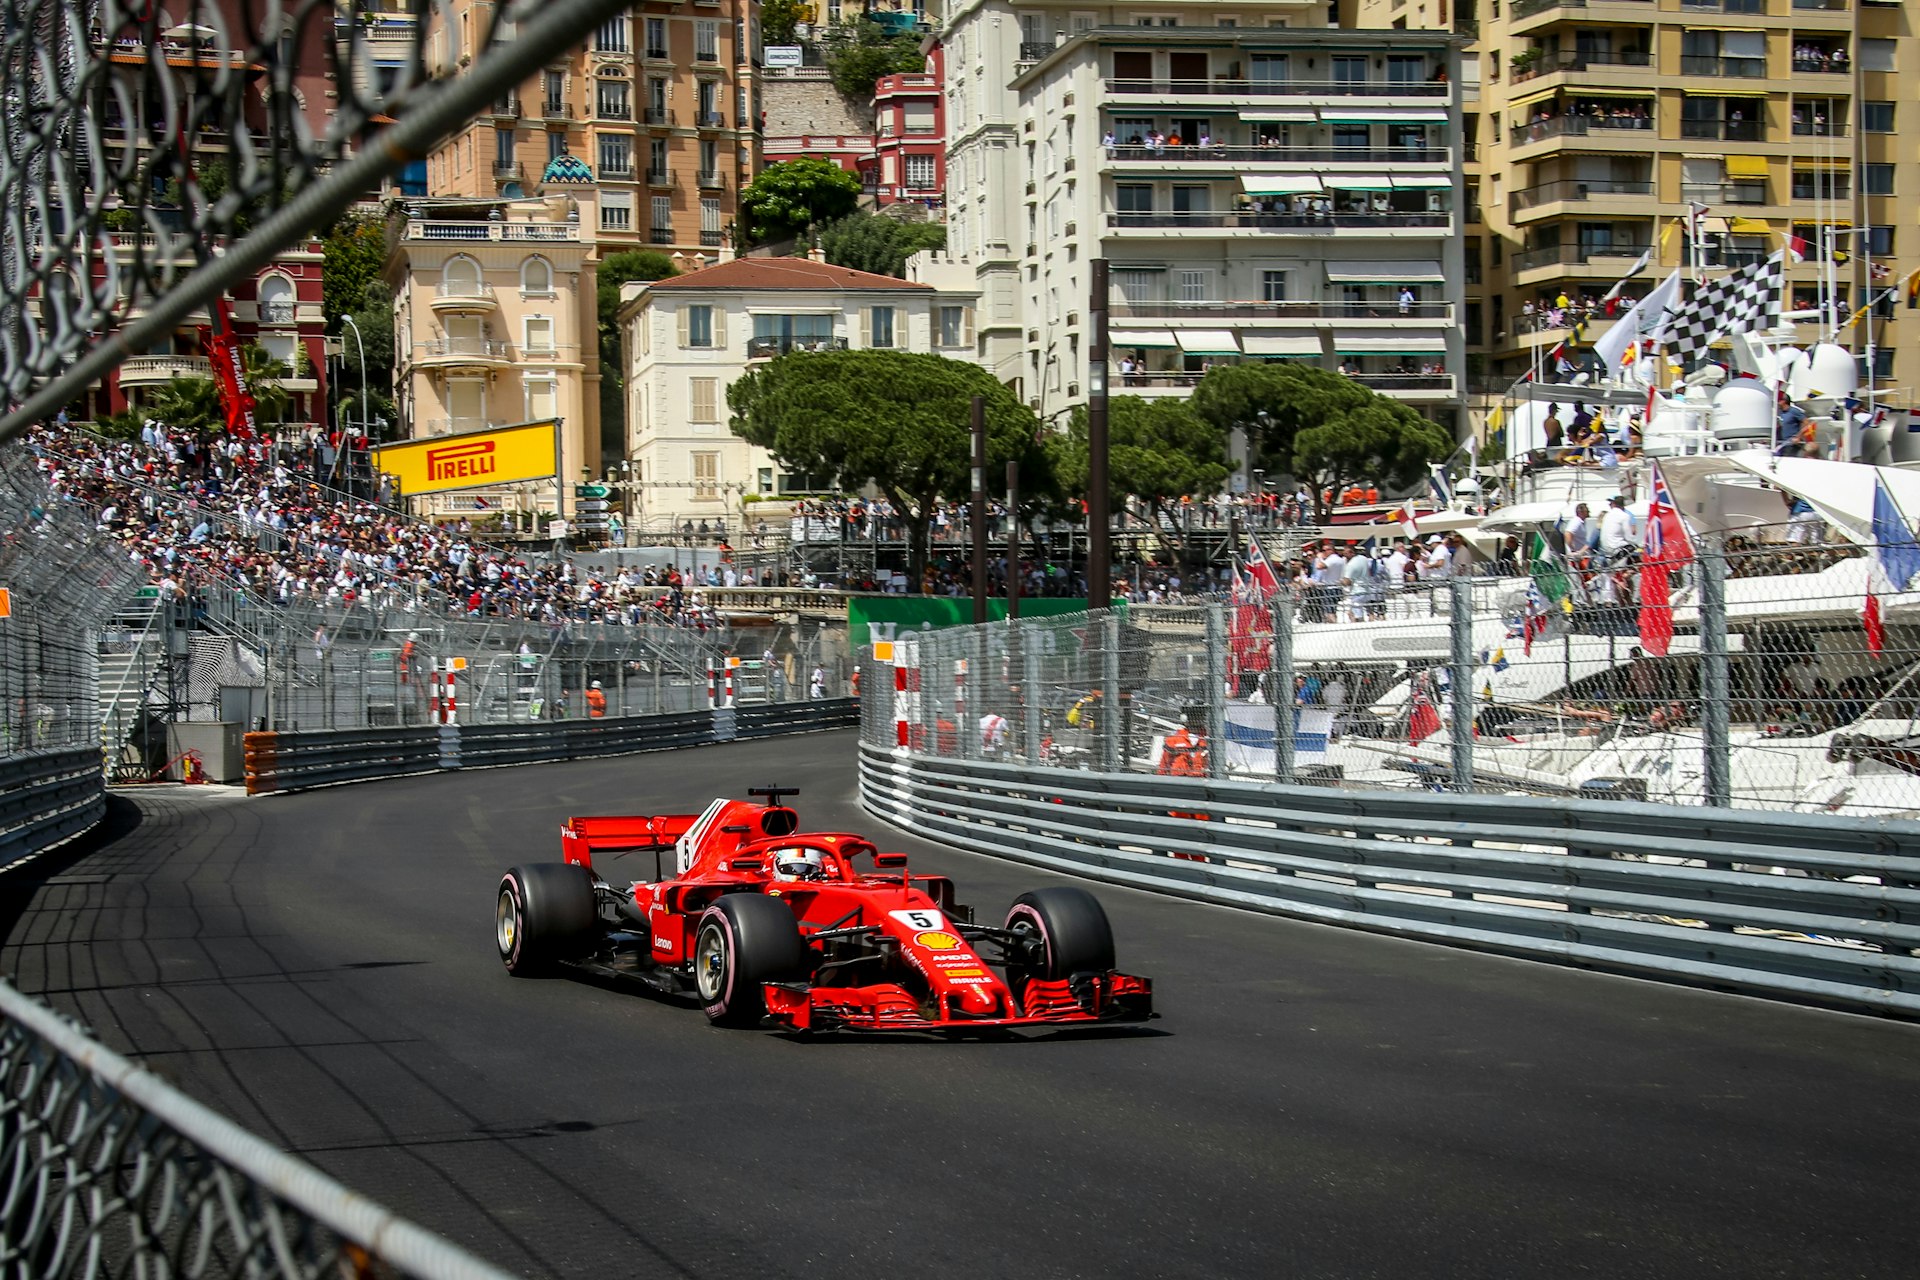 A red Formula-1 car on a track with a seating area on one side of the track and luxury yachts on the other